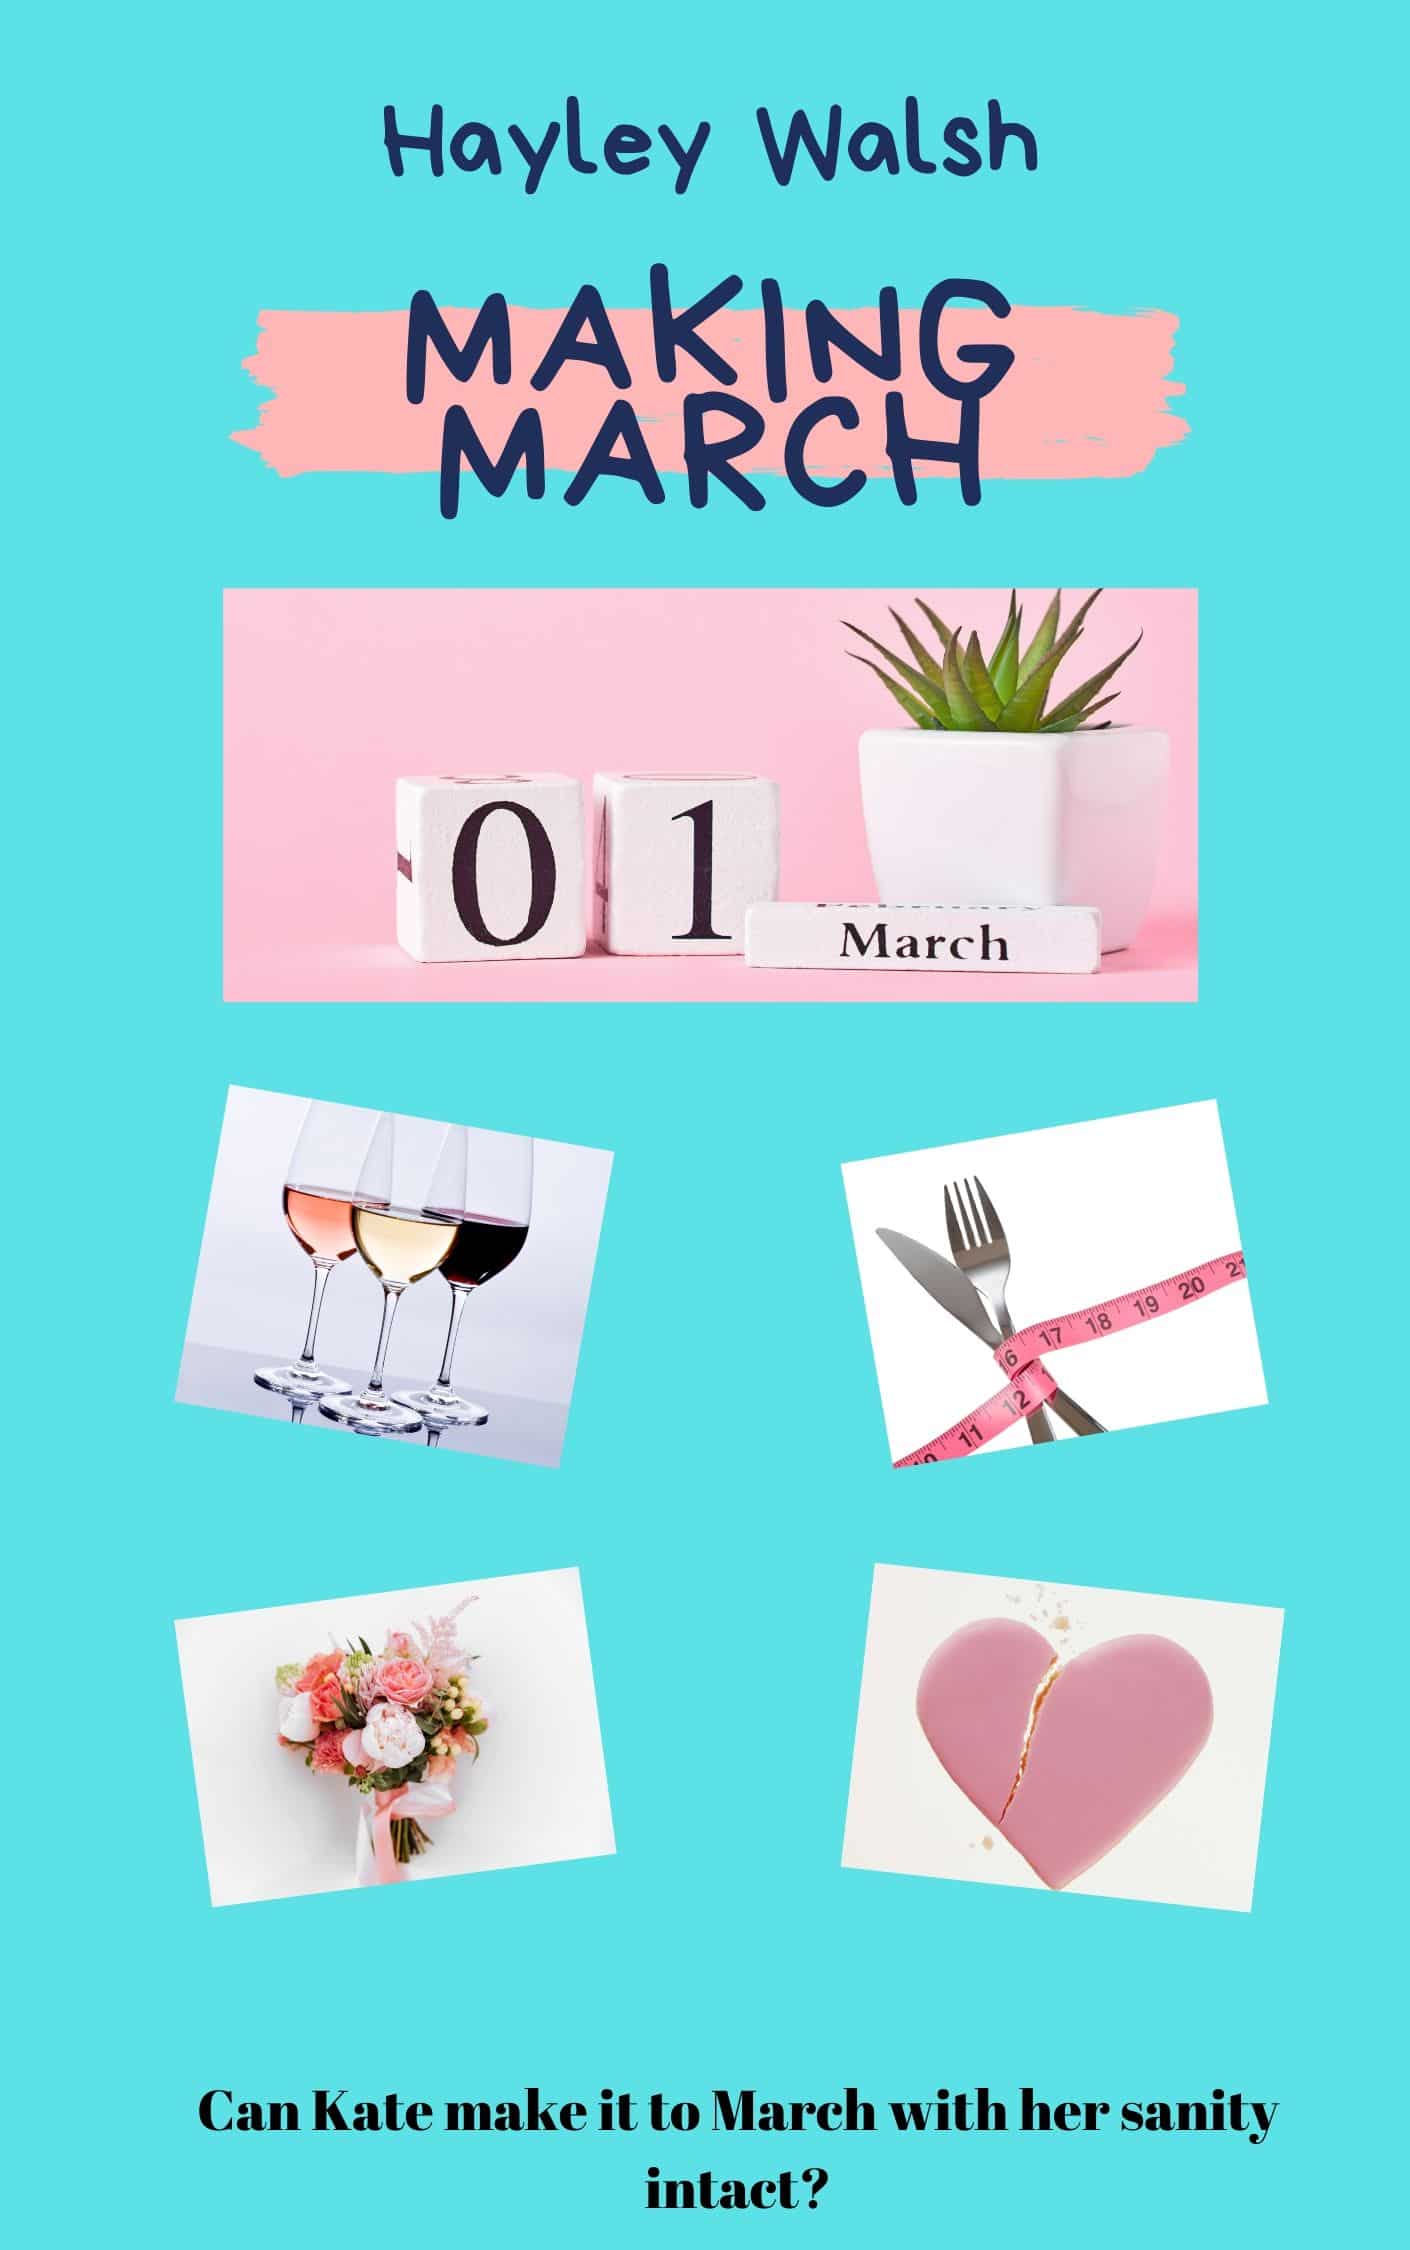 Making March book cover